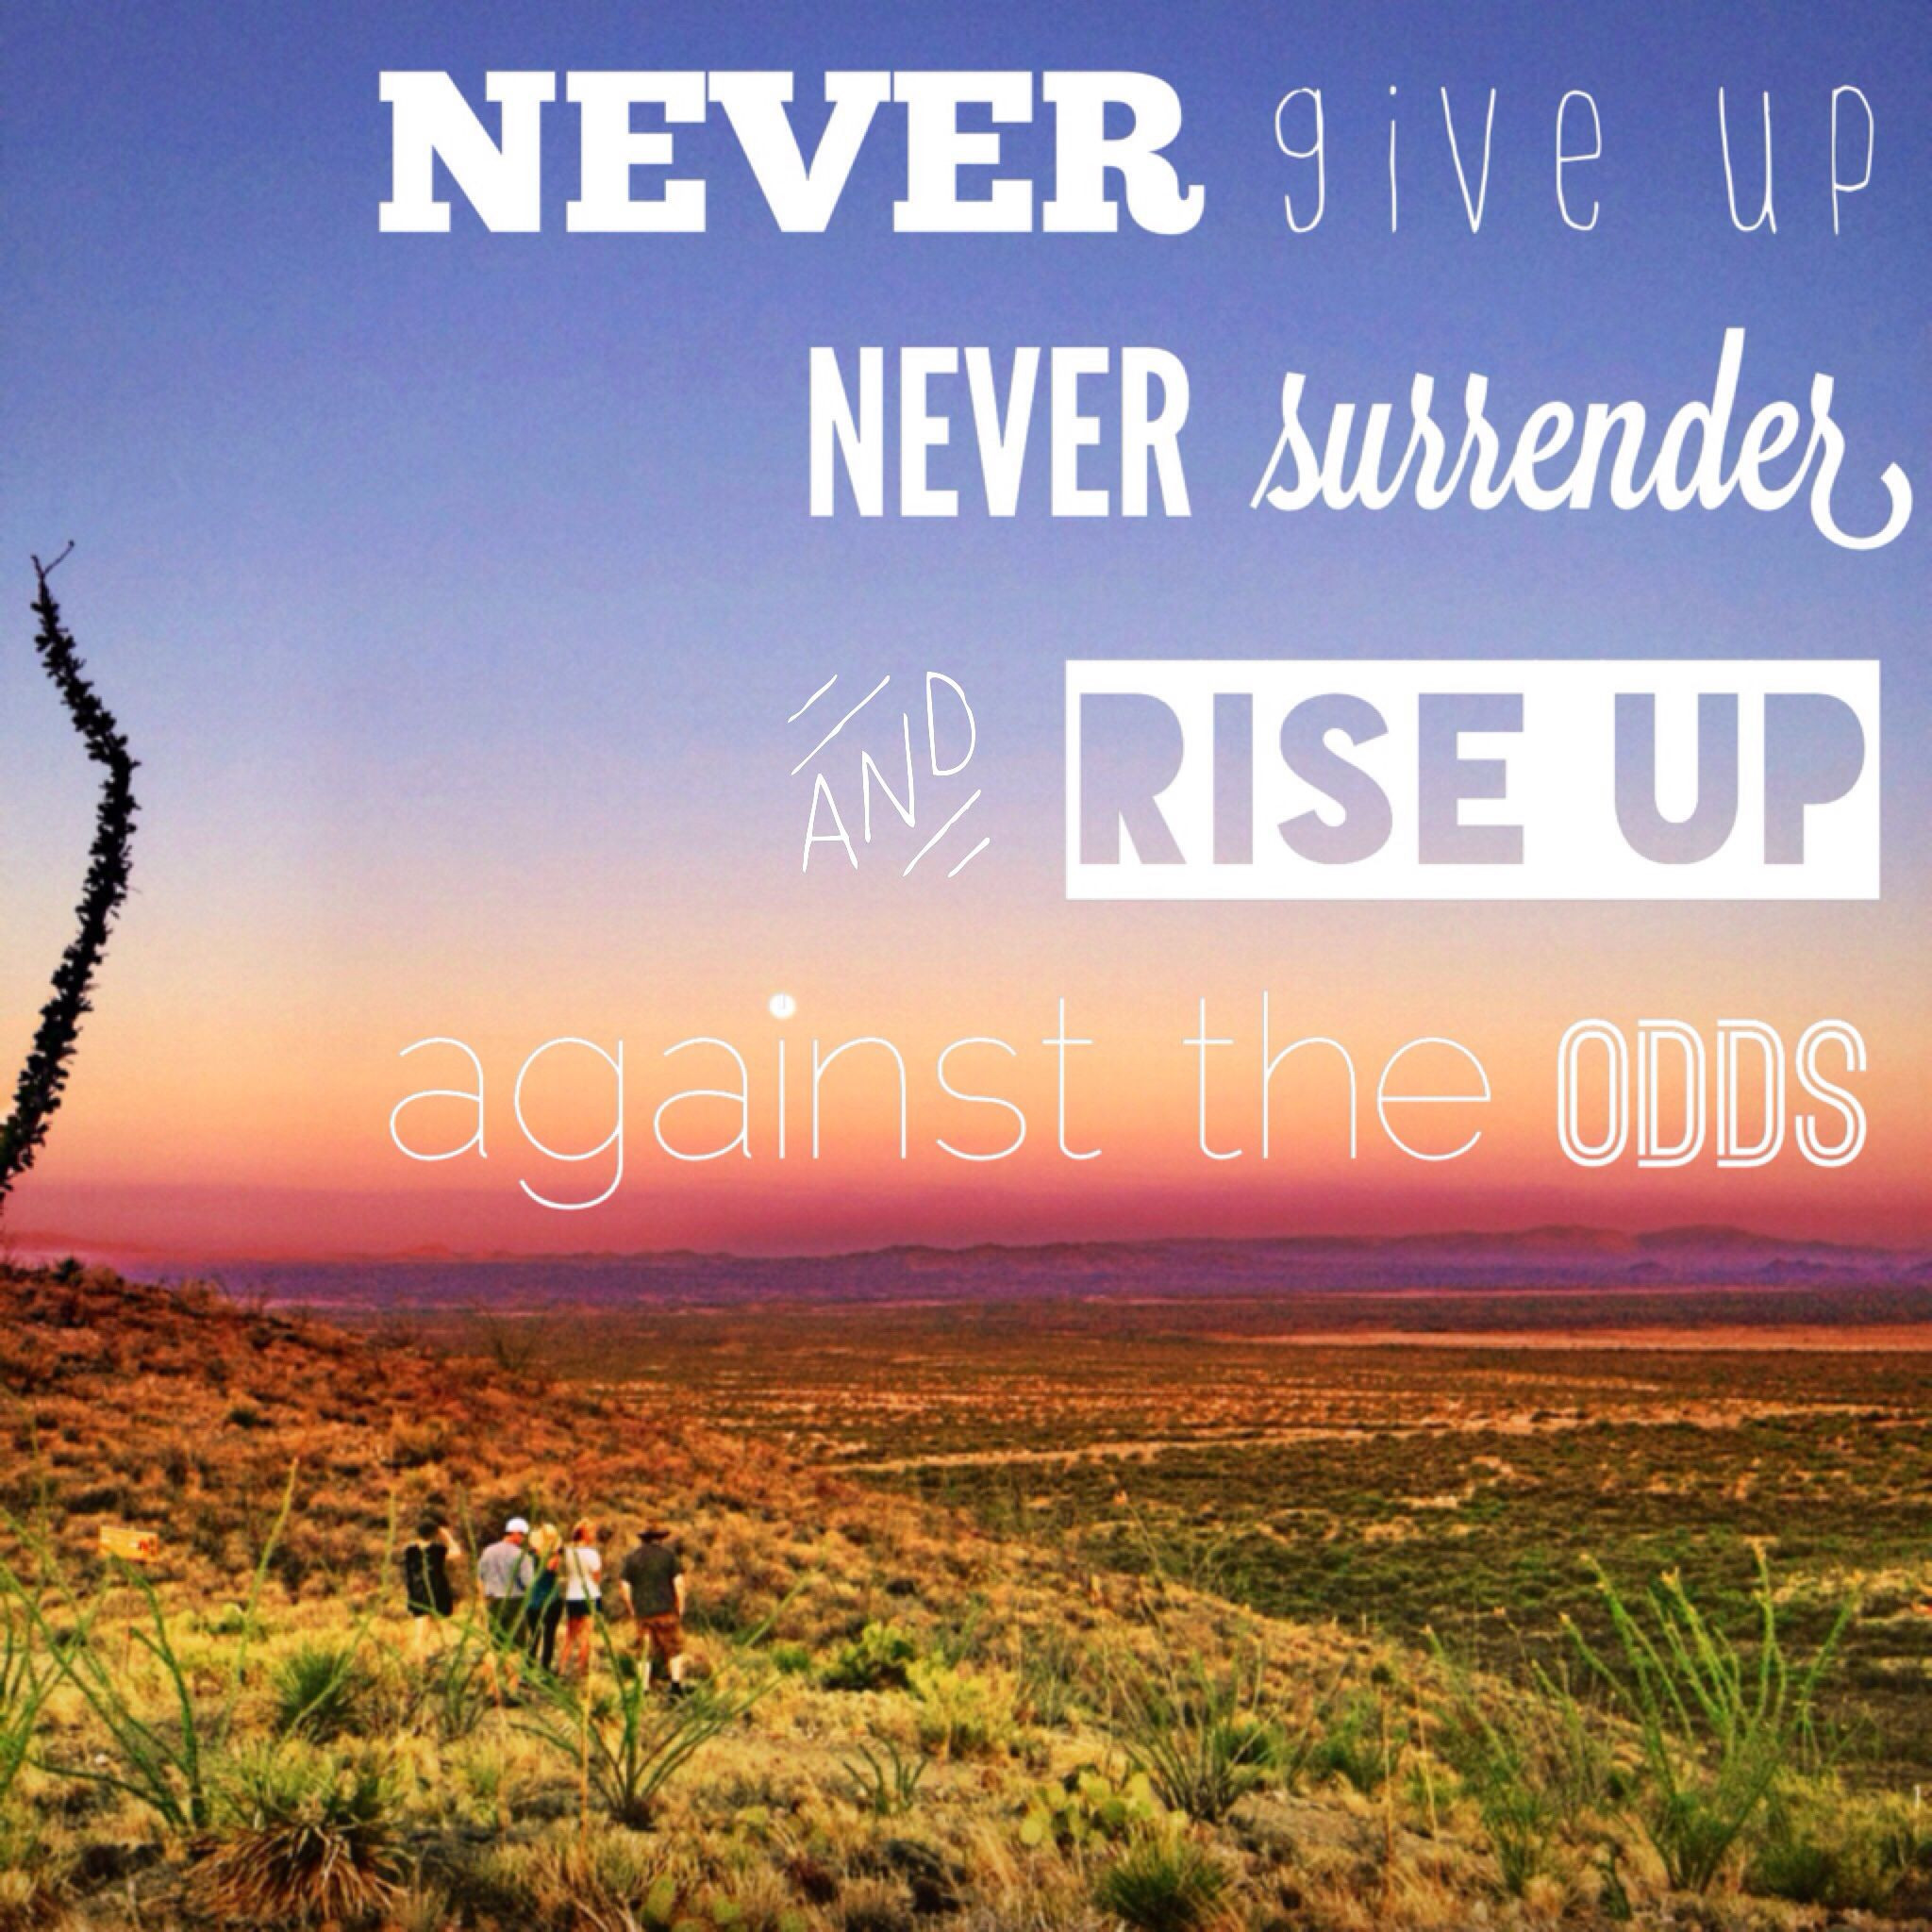 Never Give Up Motivational Quotes
 Hockey Never Give Up Quotes QuotesGram